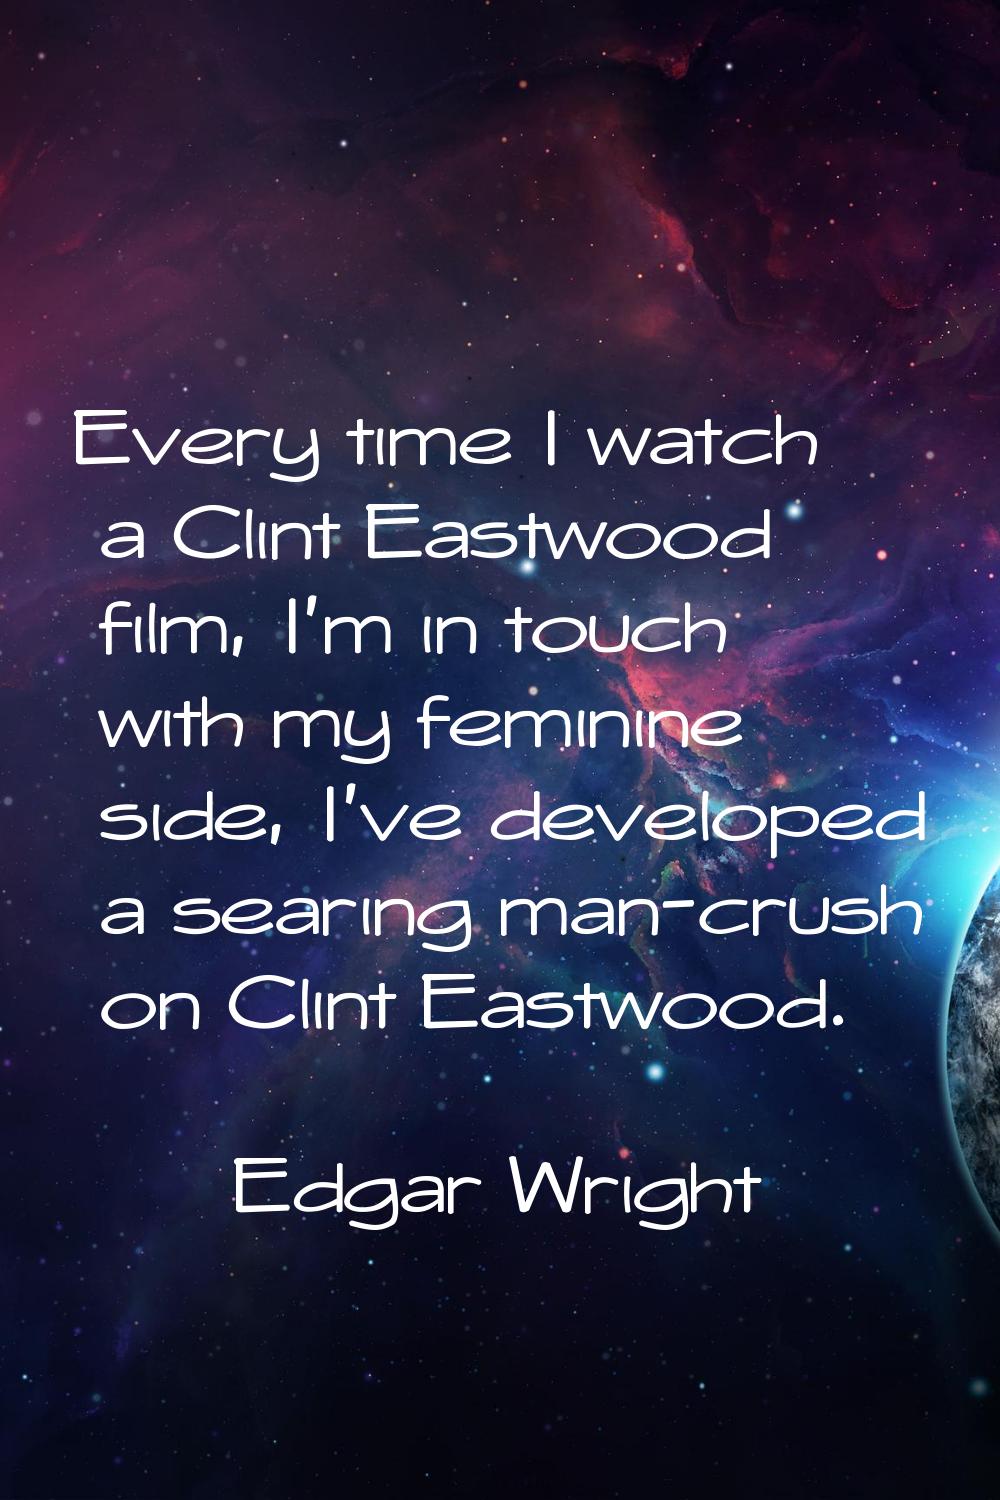 Every time I watch a Clint Eastwood film, I'm in touch with my feminine side, I've developed a sear